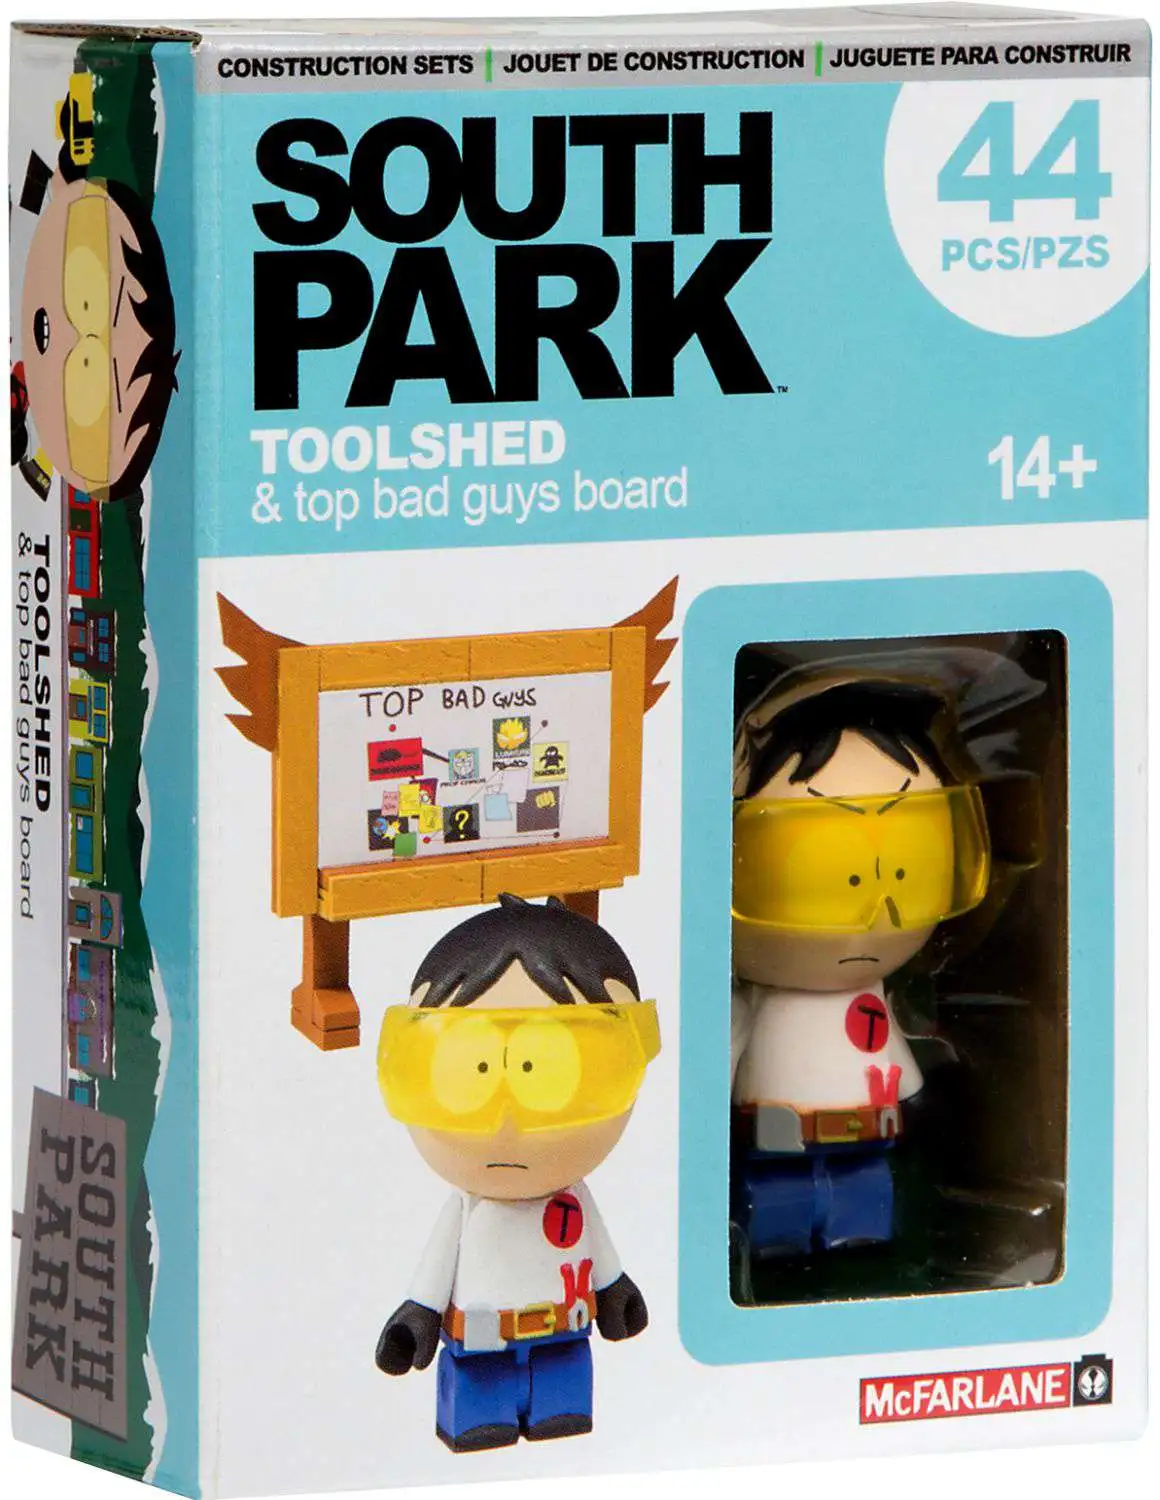 South Park Toolshed & Top Bad Guys Board Set McFarlane Toys NEW 